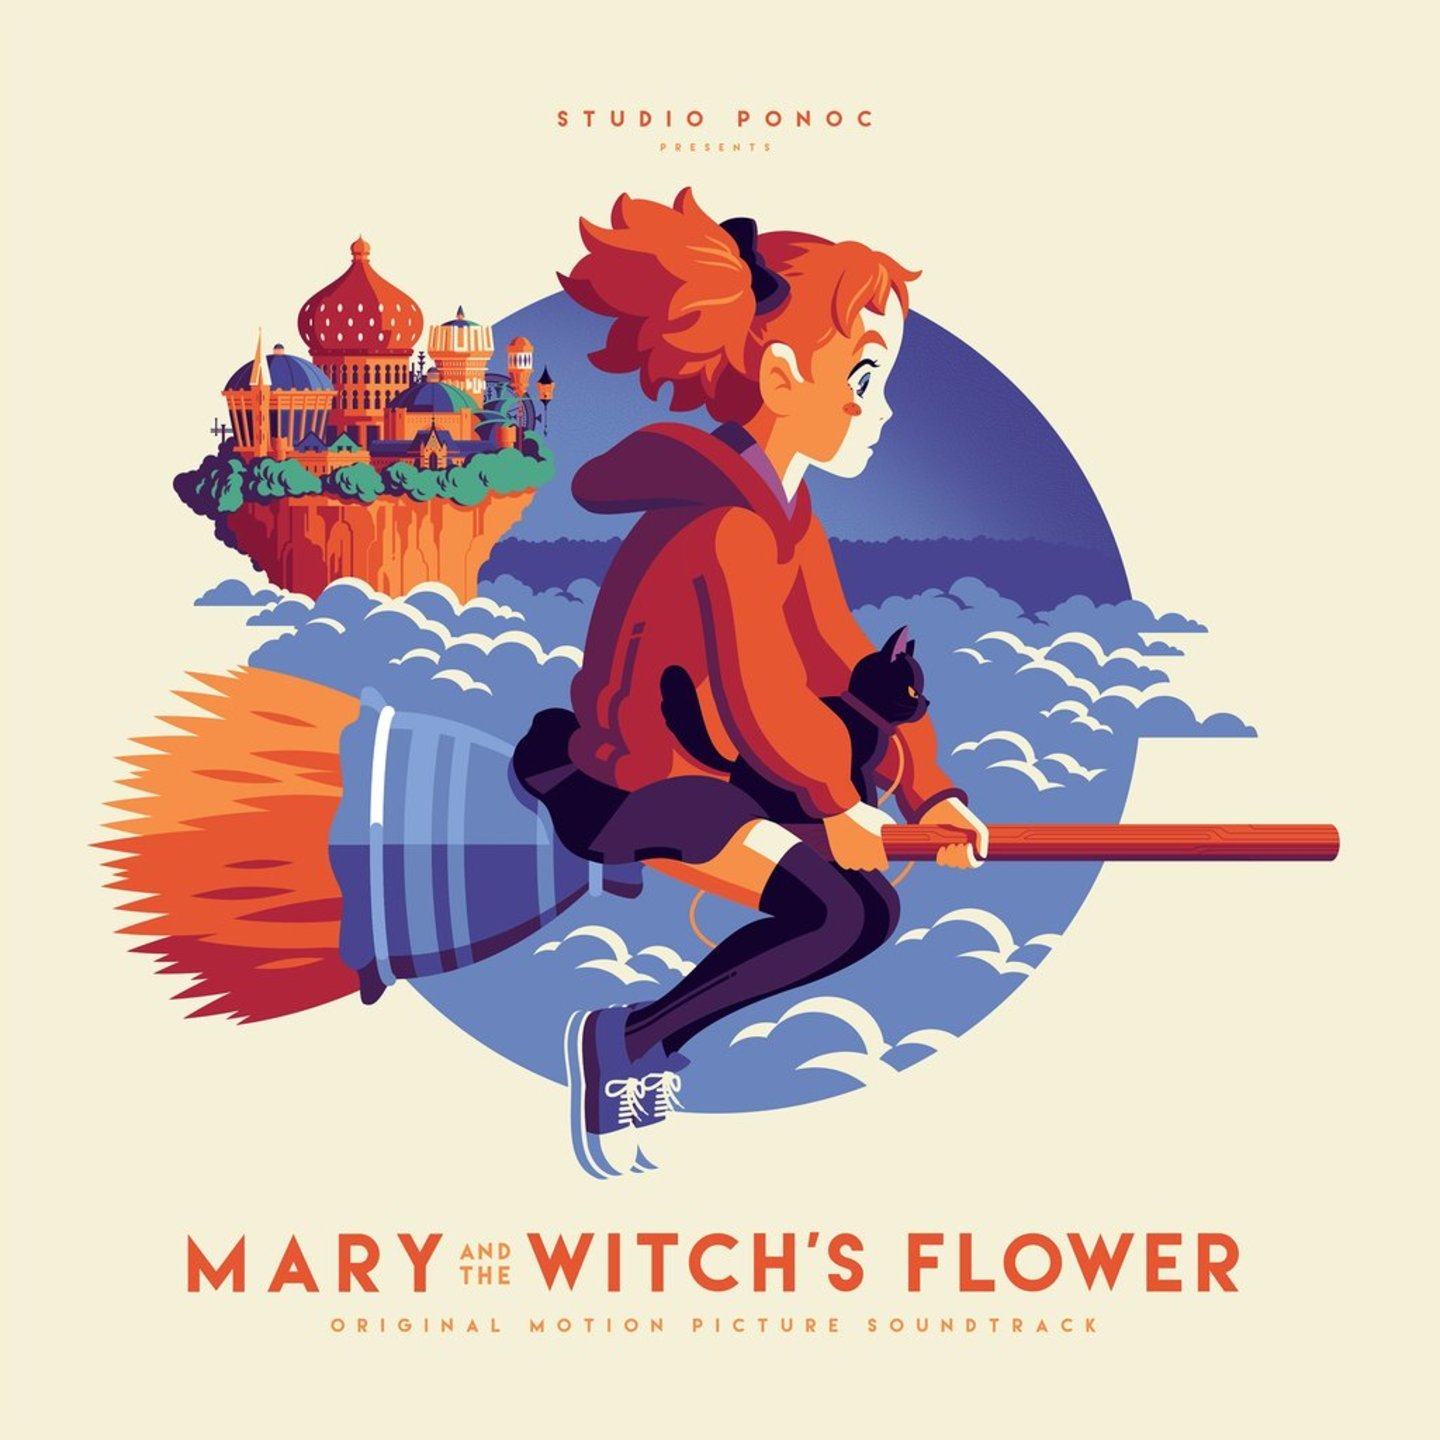 TAKATSUGU MURAMATSU - Mary And The Witchs Flower Original Motion Picture Soundtrack 2xLP